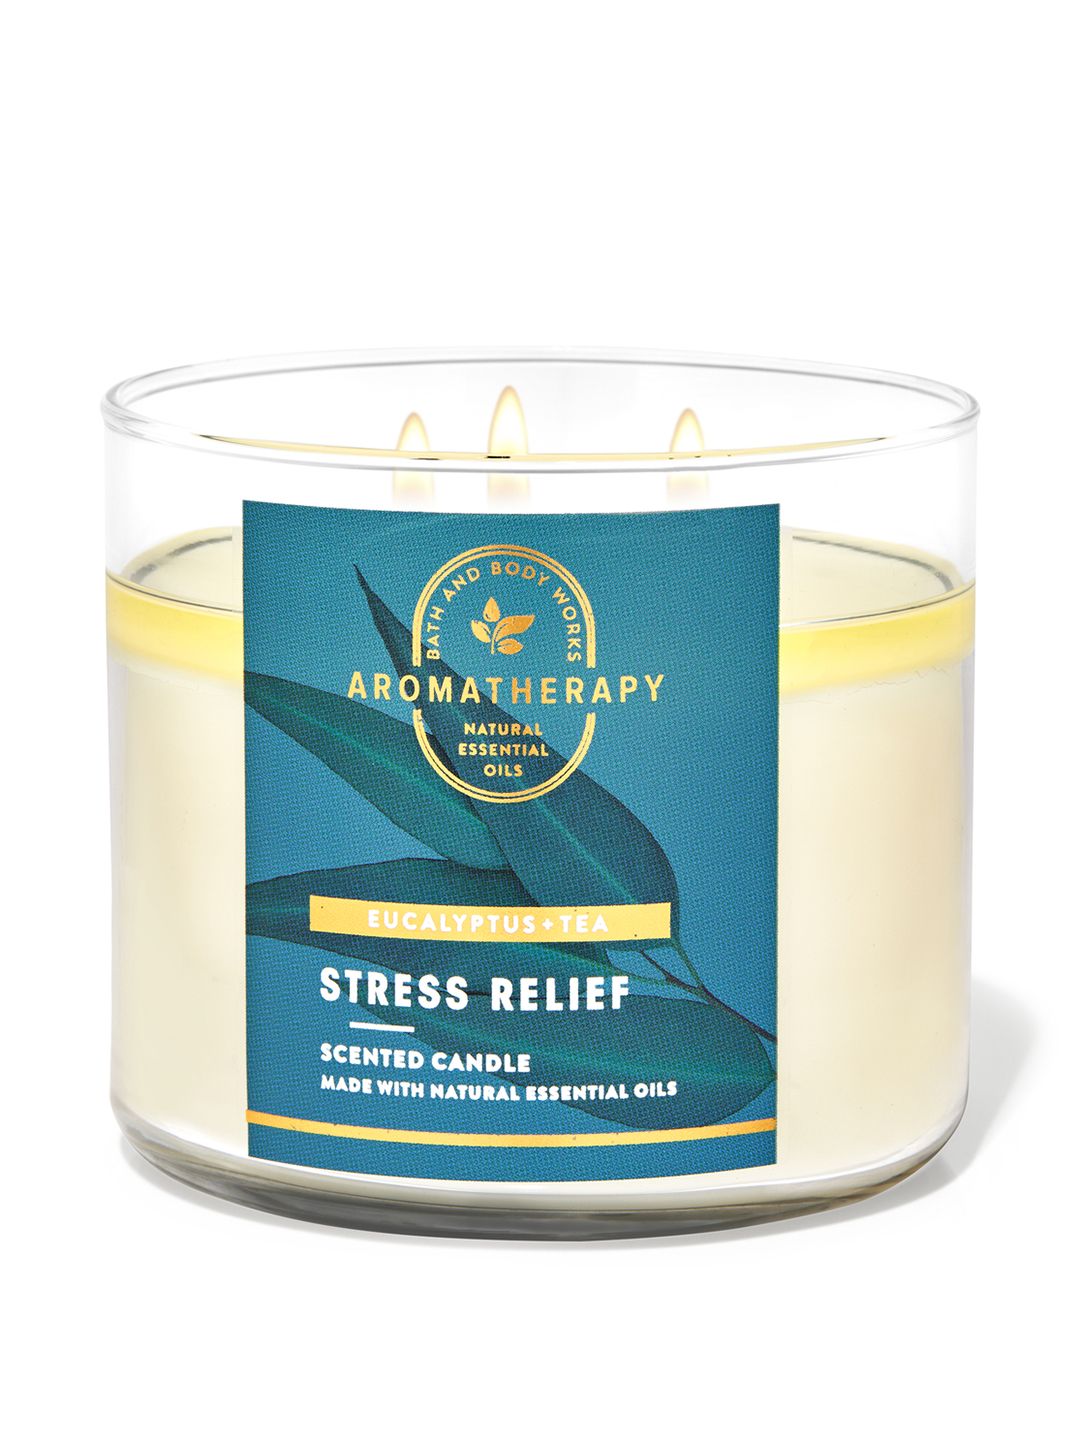 Bath & Body Works Aromatherapy Eaucalyptus+Tea Stress Relief 3-Wick Scented Candle - 421g Price in India